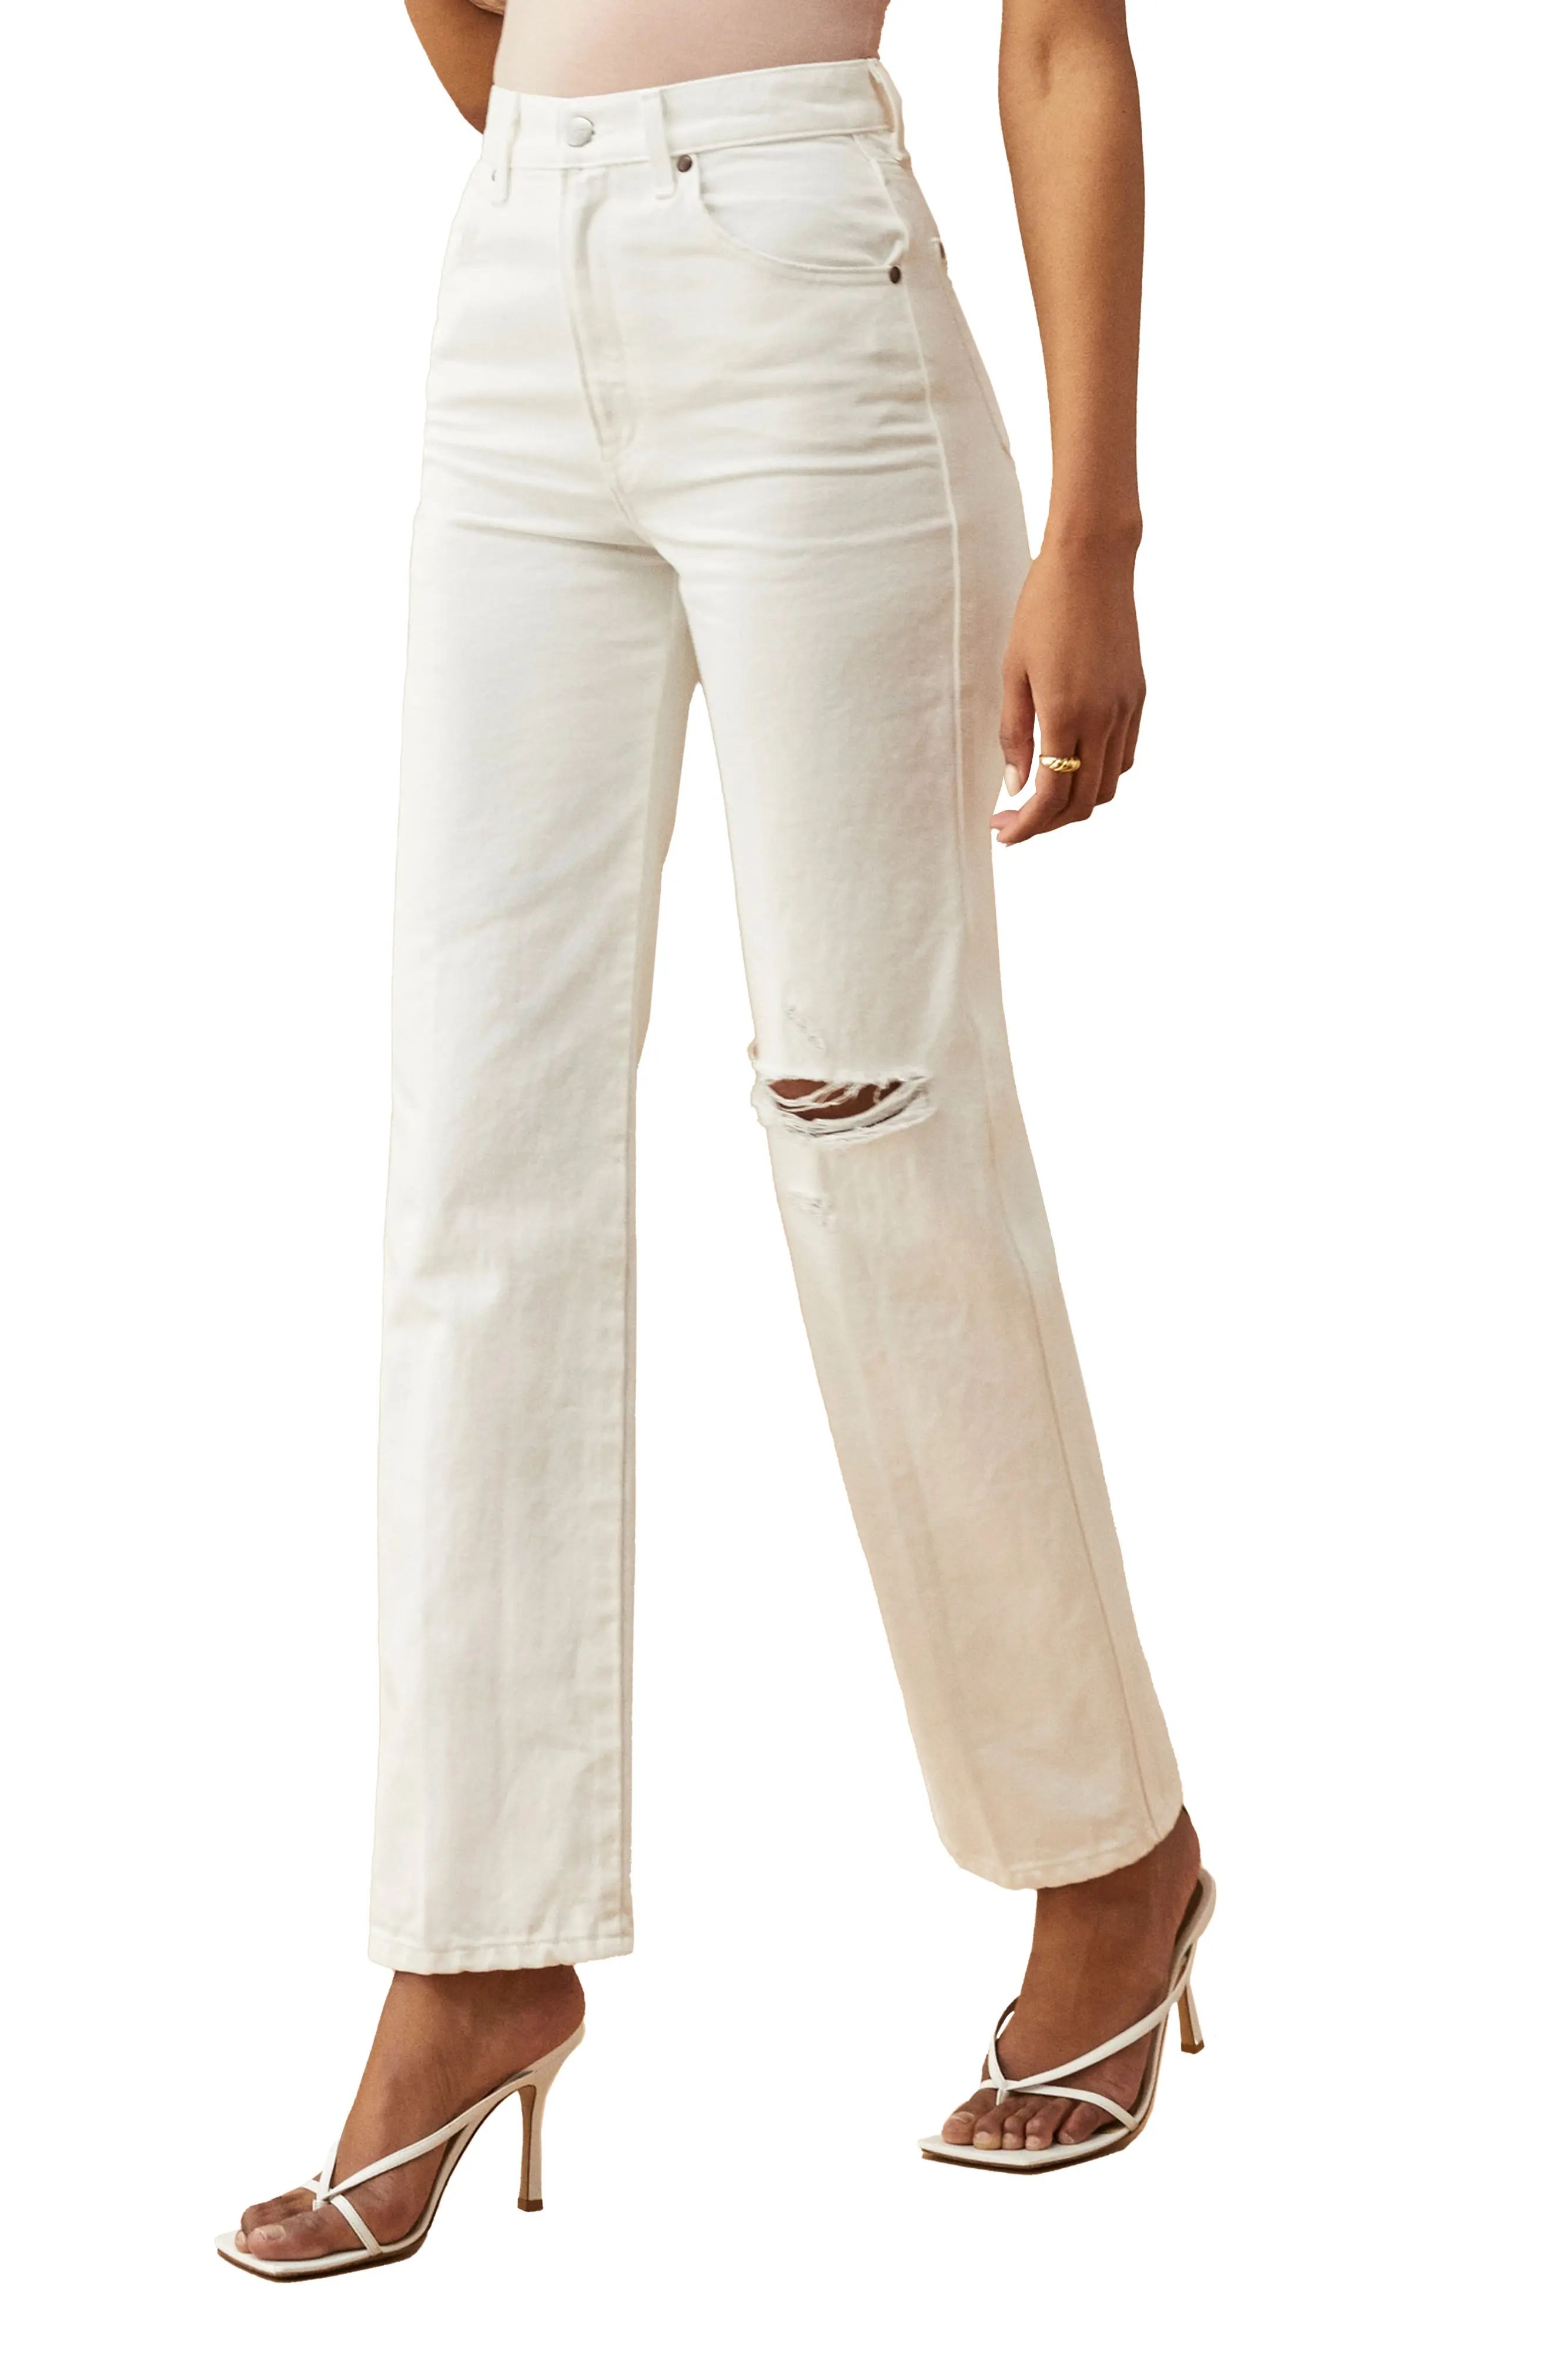 Reformation Cowboy High Waist Straight Leg Jeans, Size 27 in Vintage White at Nordstrom | Nordstrom